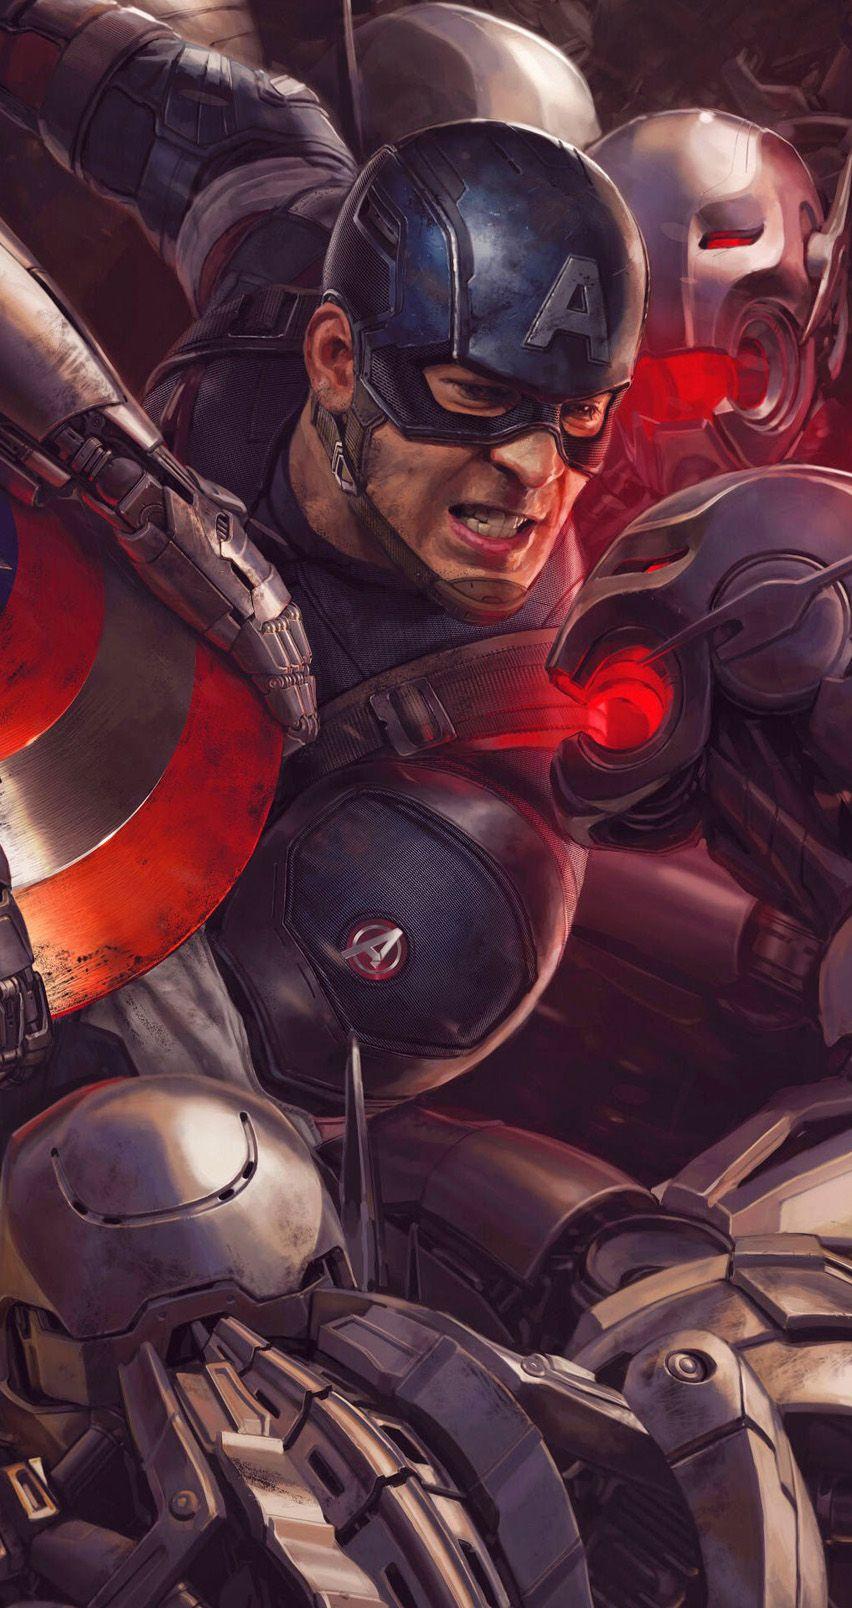 Avengers age of ultron Captain American wallpaper for iPhone